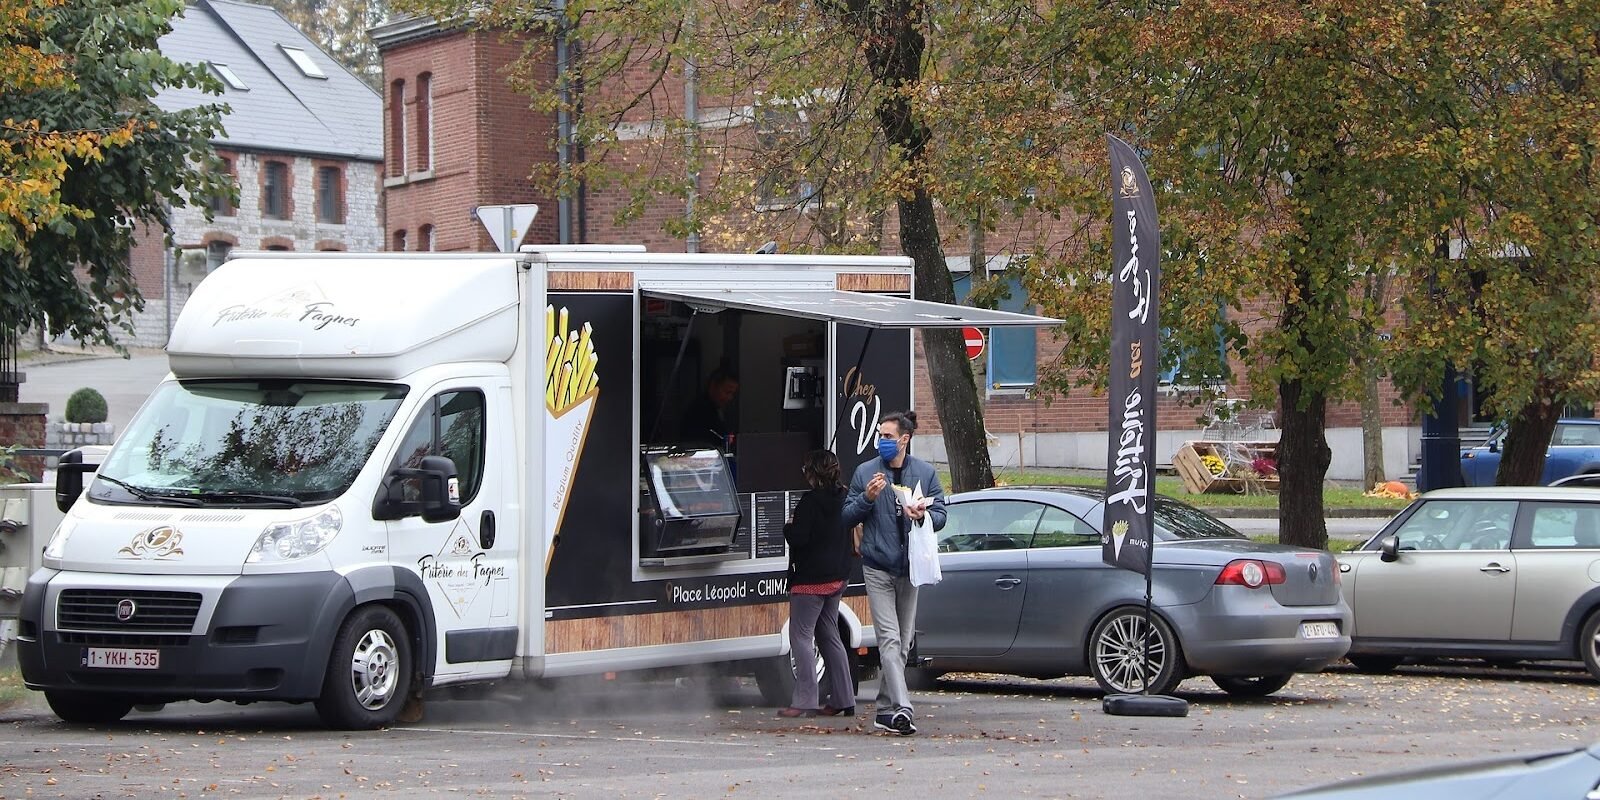 Customers getting food from a food truck